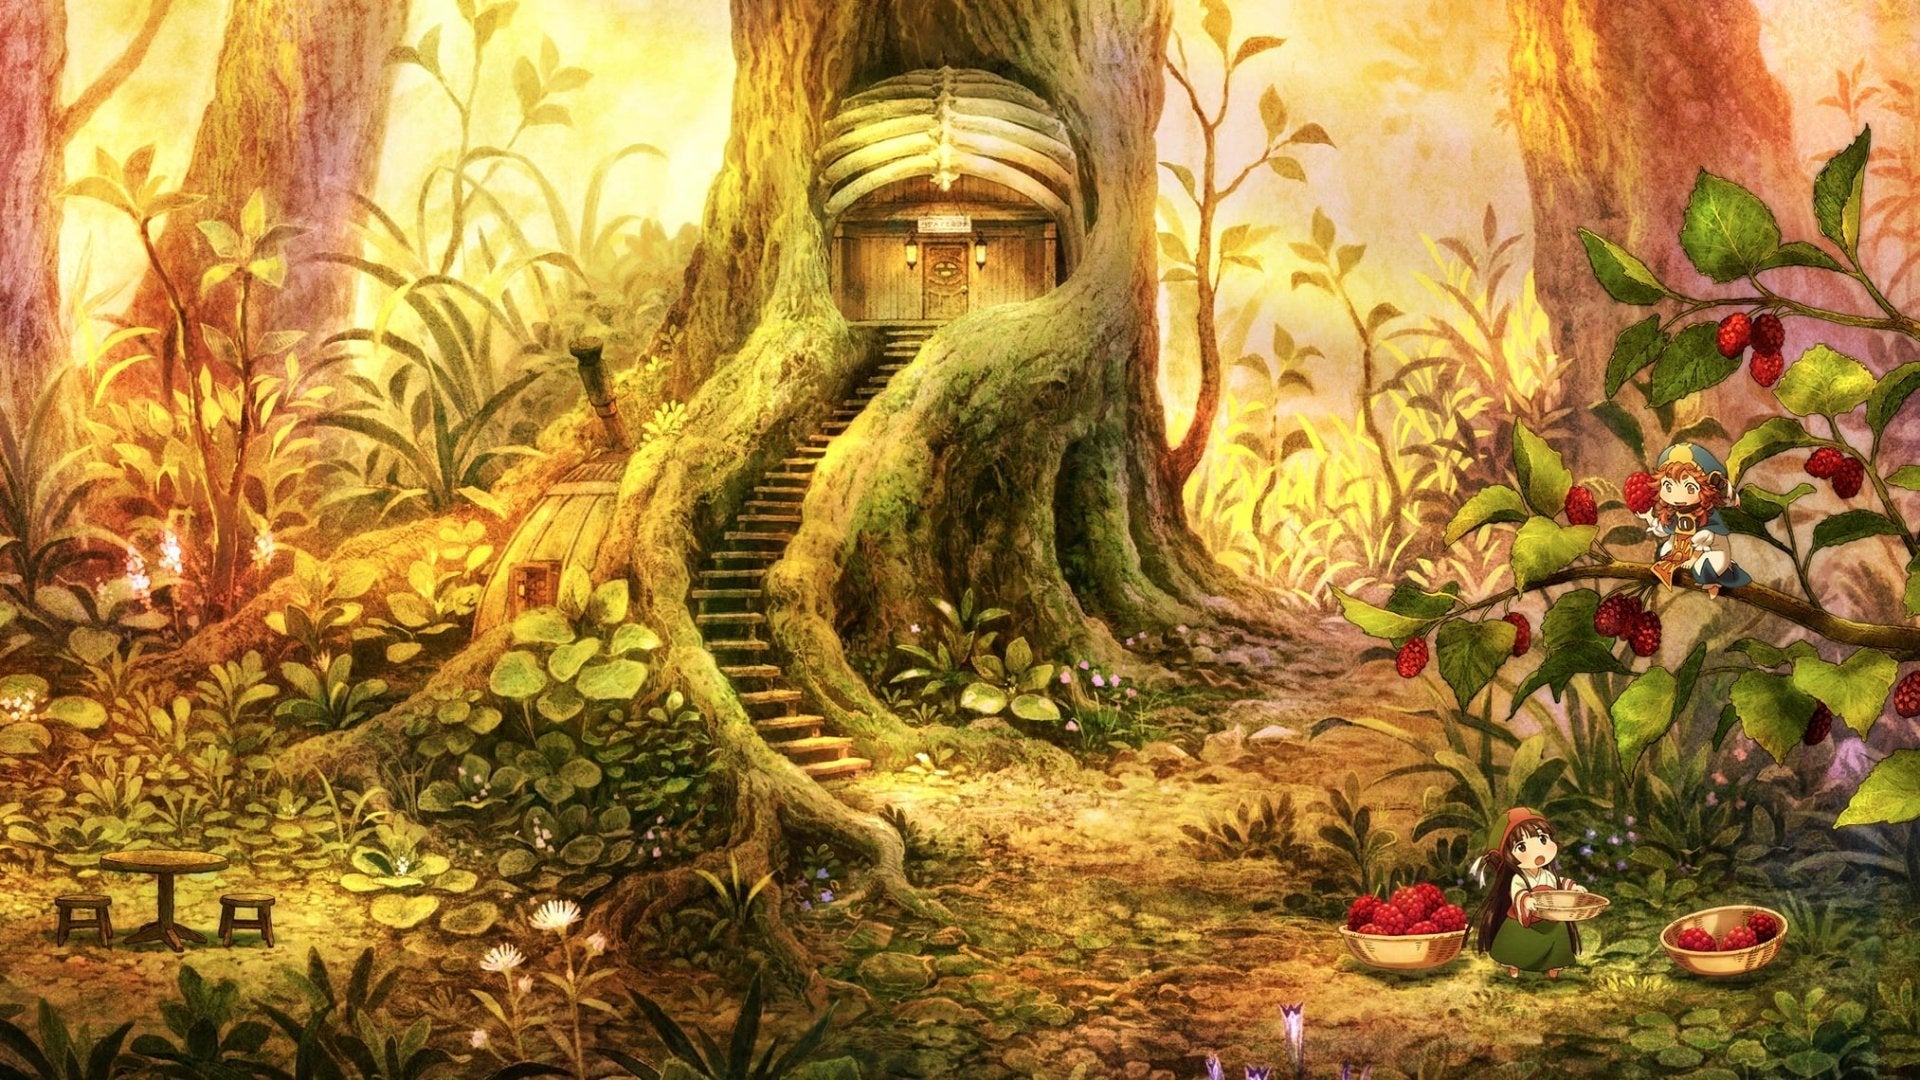 I finished an anime that gave me huge cottagecore feelings: Hakumei to Mikochi. It's really cute and really simple. It follows two tiny humans in a world that has the same scale